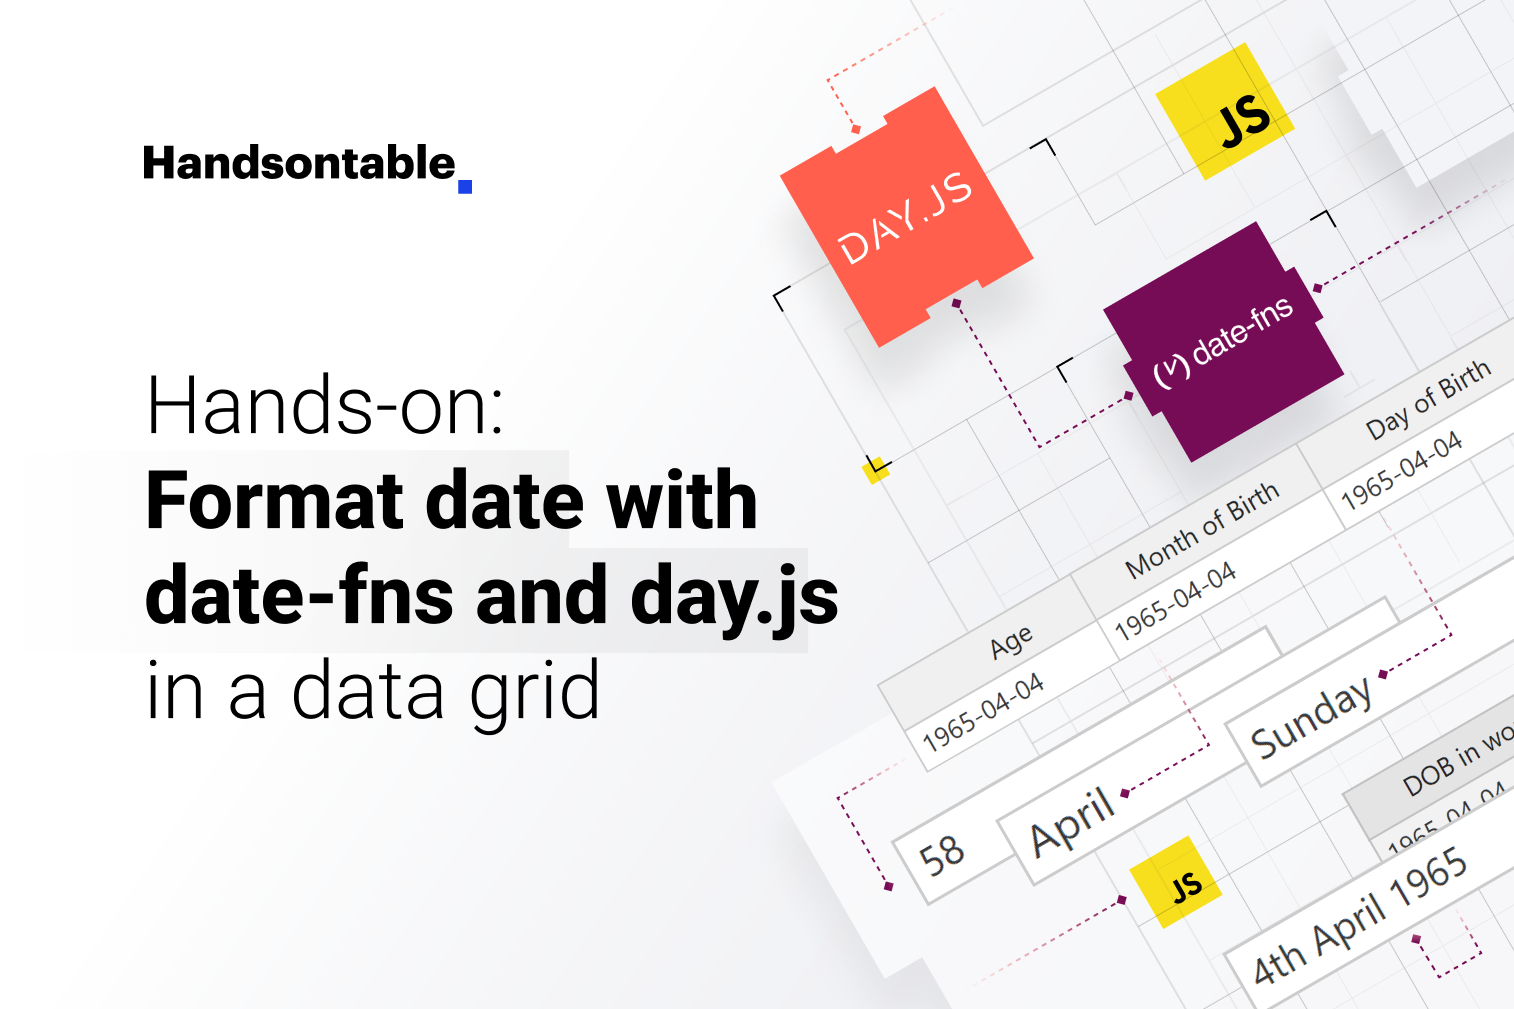 Hands-on: Format date with date-fns and day.js in a data grid